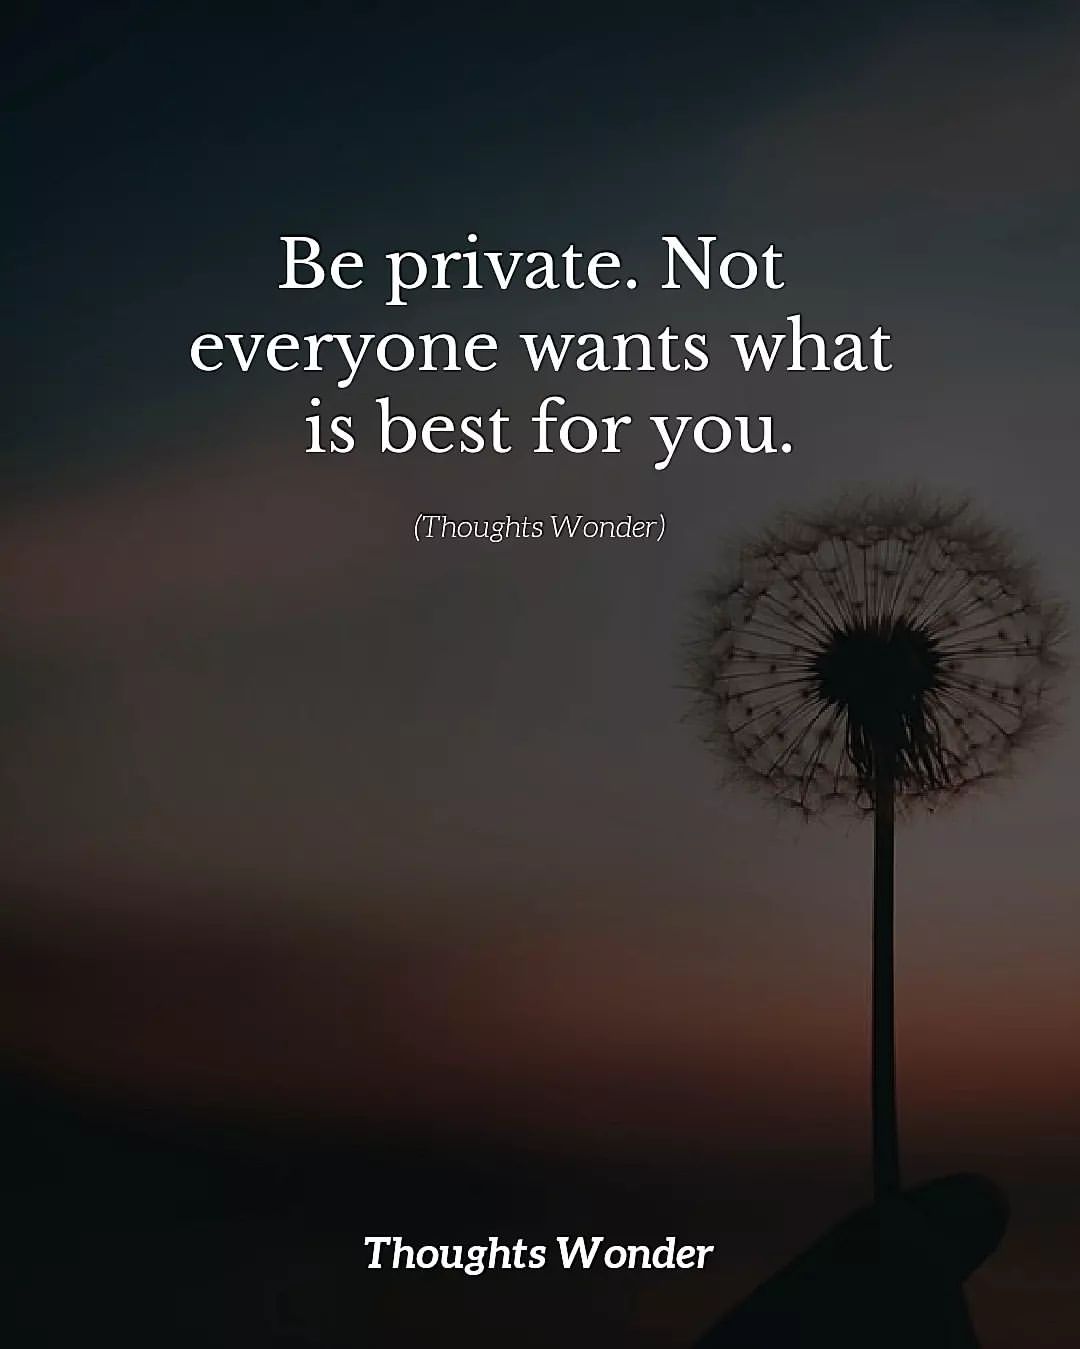 Be private. Not everyone wants what is best for you.